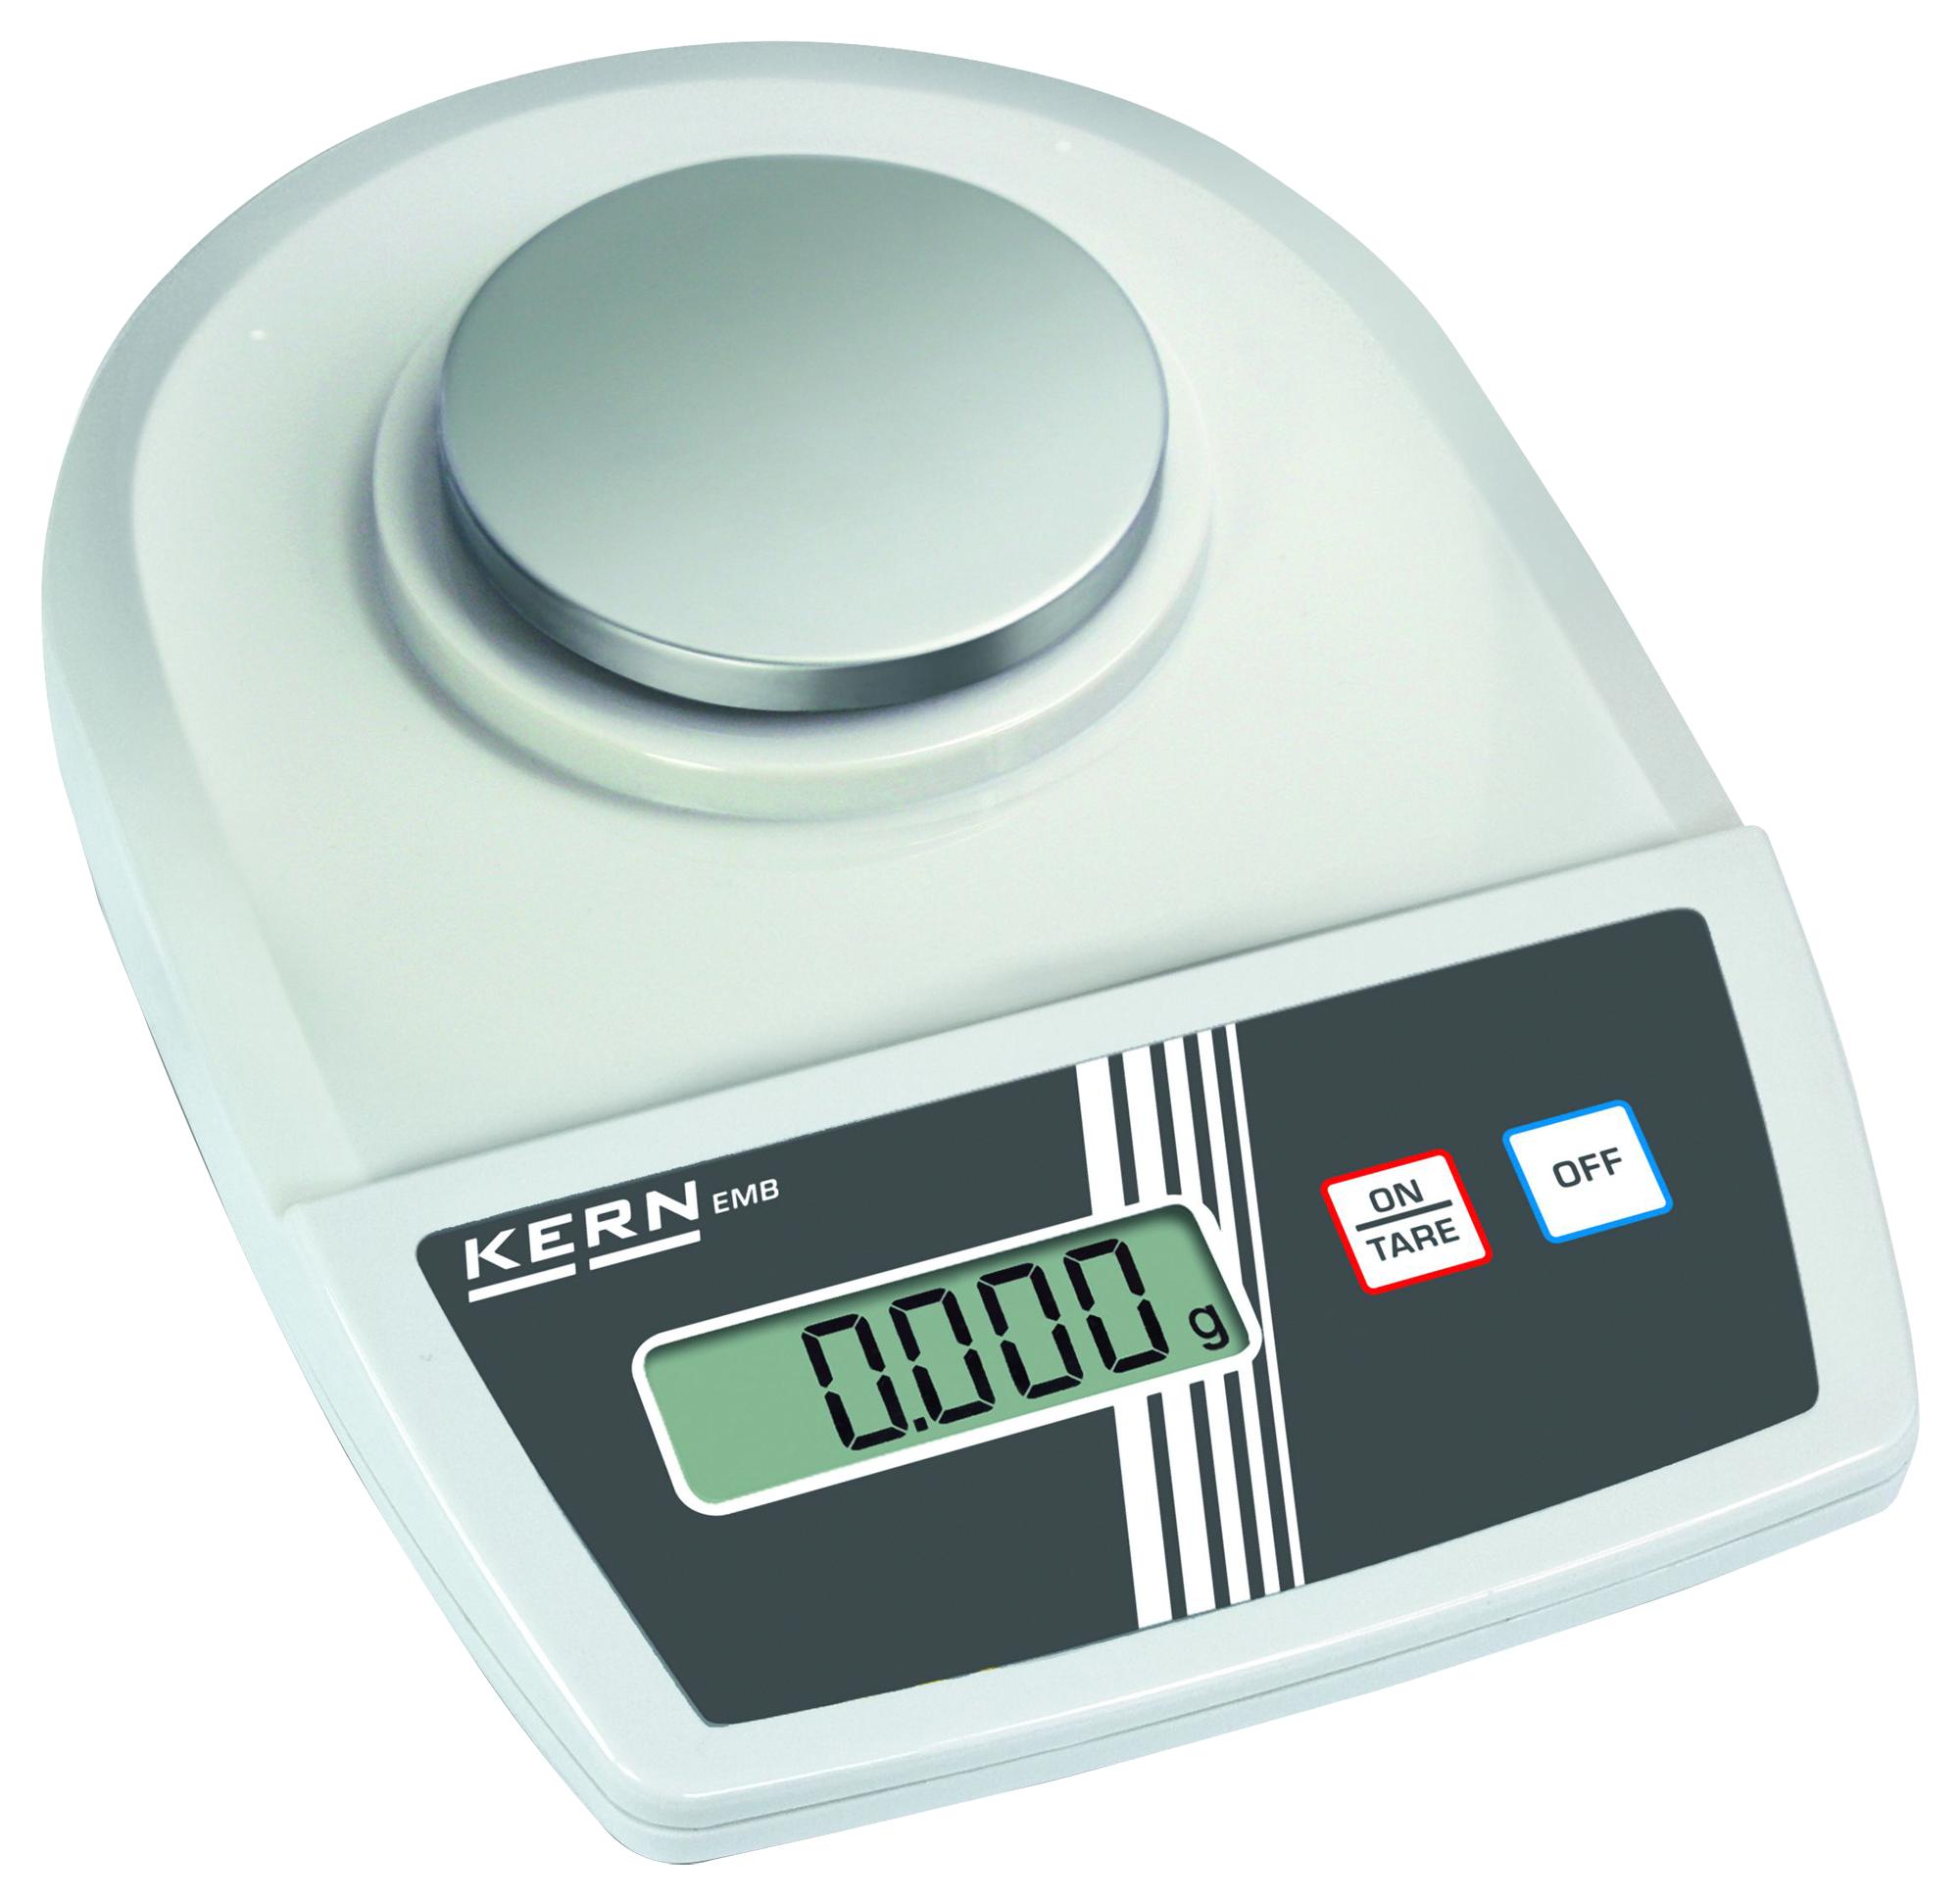 EMB 200-3 WEIGHING SCALE, PRECISION, 200G KERN